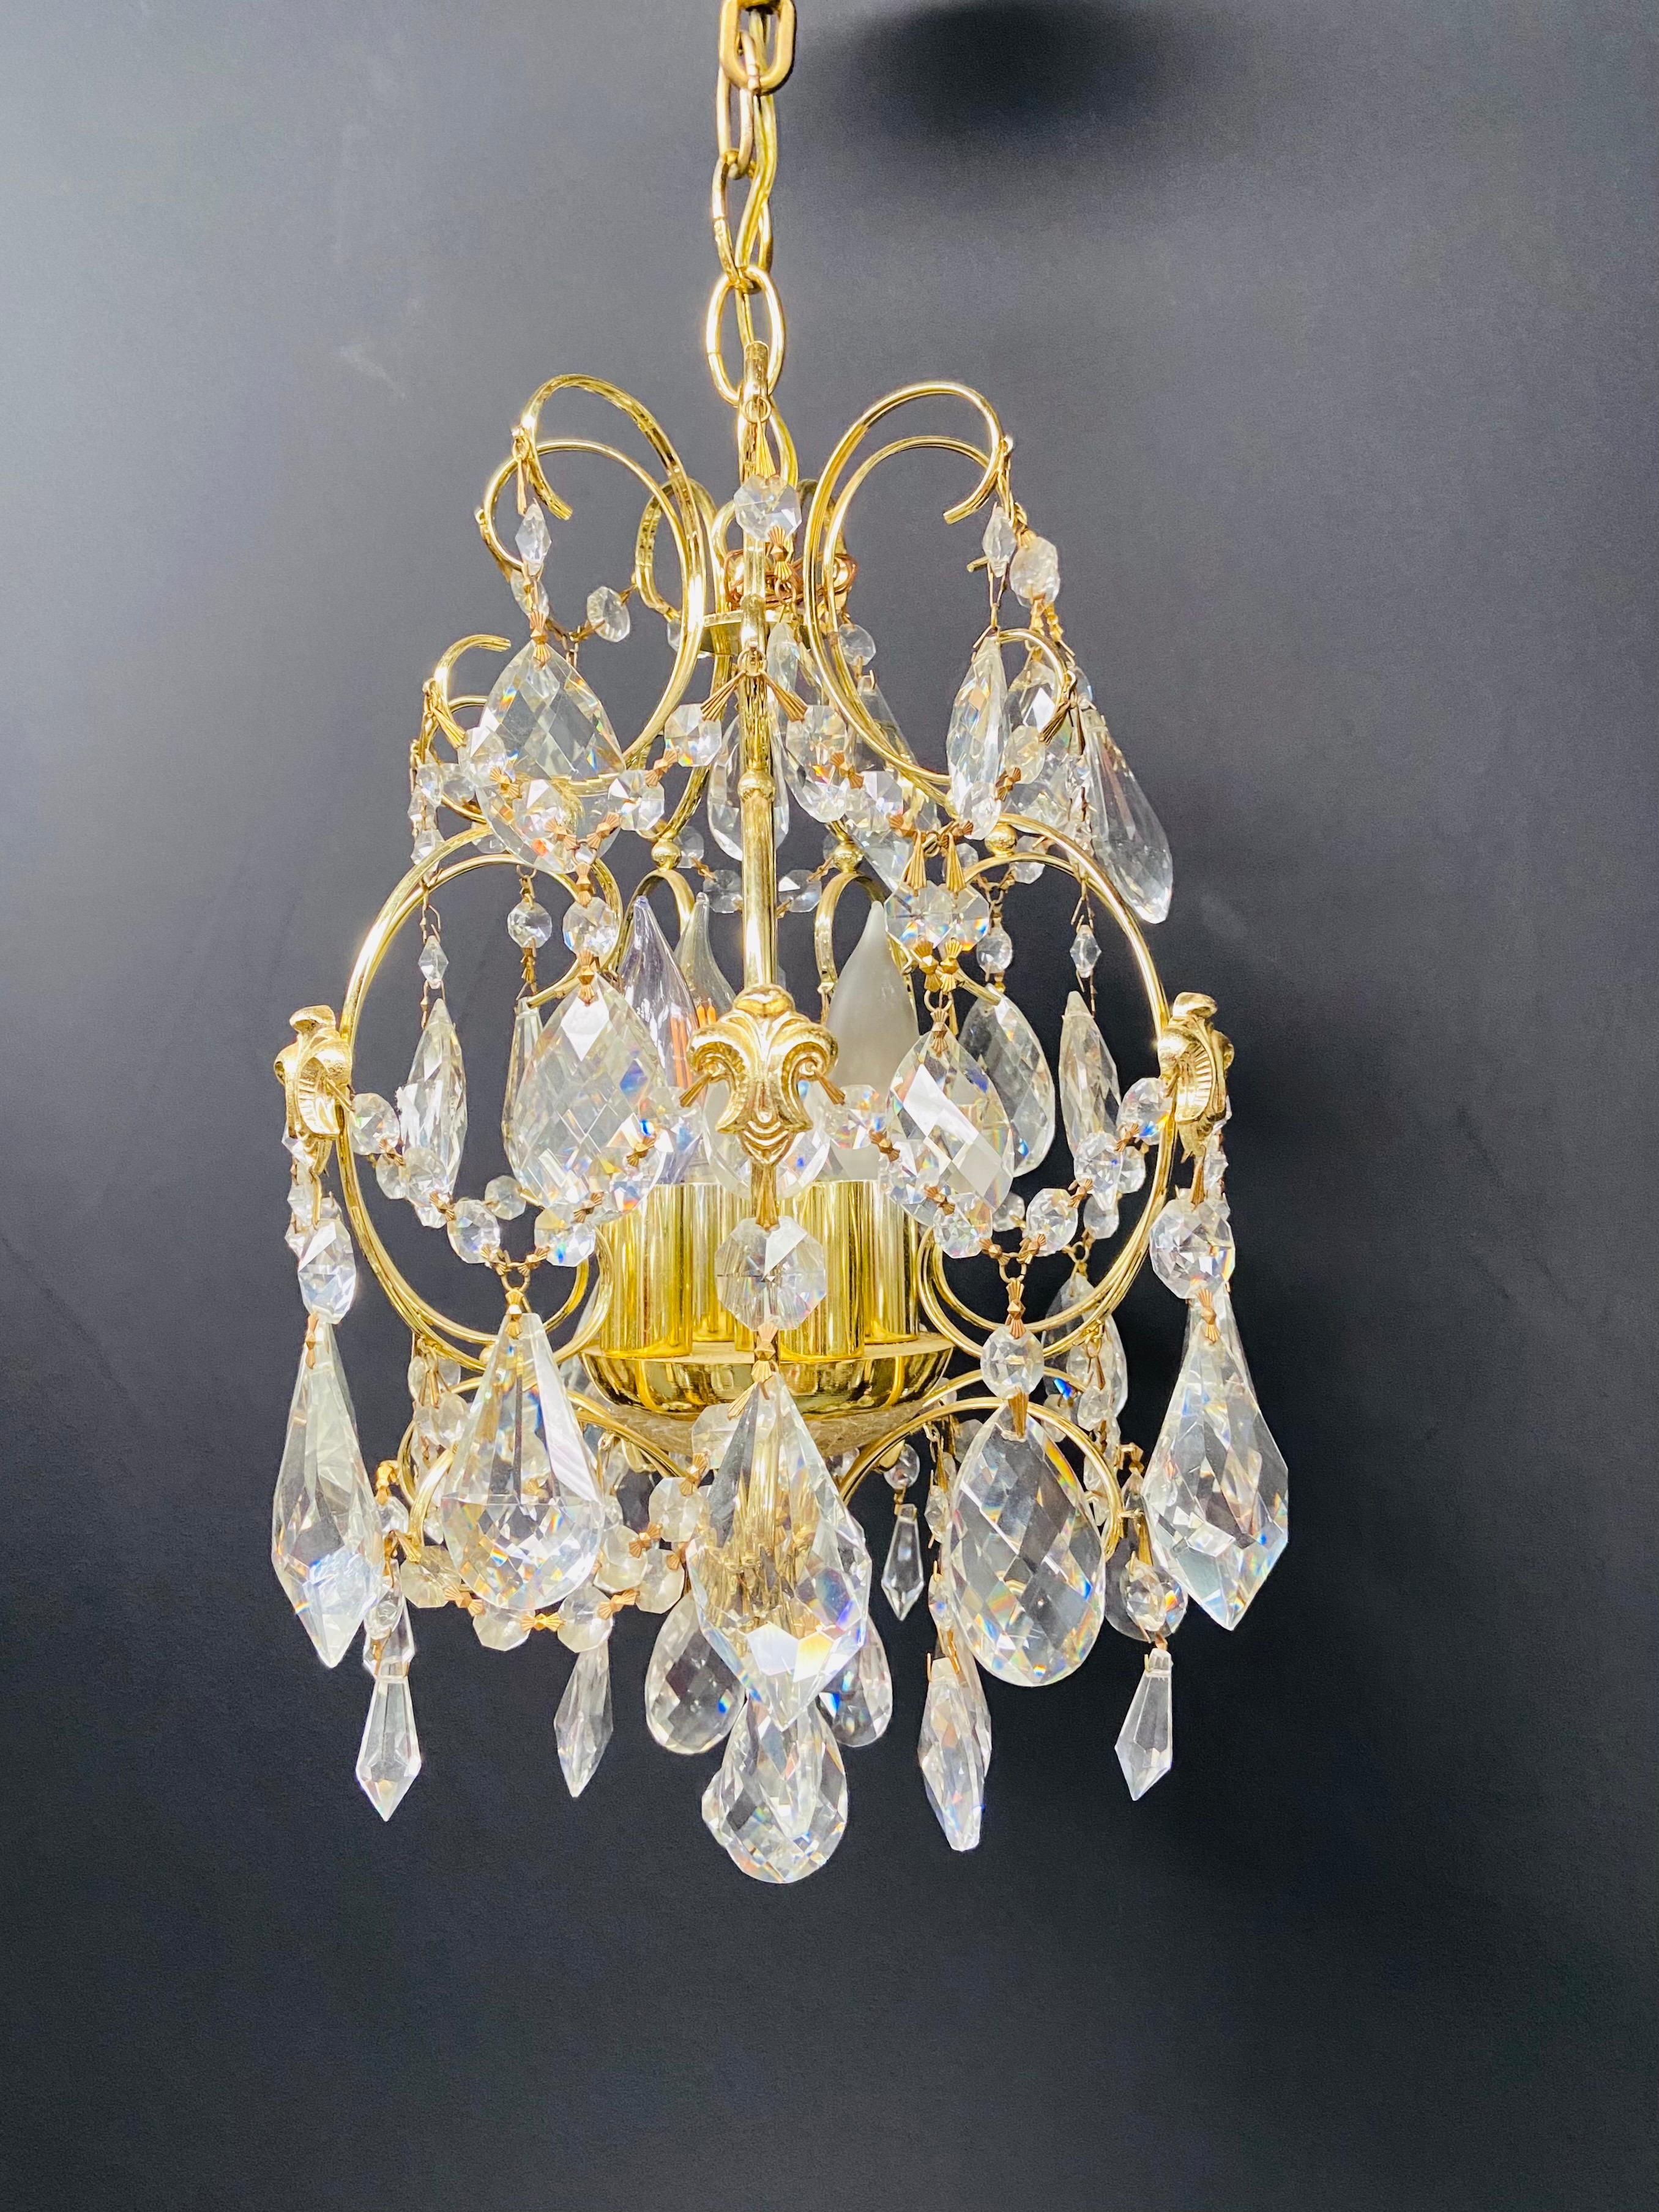 A beautiful cascading gilt brass frame and crystal chandelier in the Hollywood Regency style. The chandelier is in excellent condition and would look gorgeous in a foyer or a small living room.

Dimensions: 15